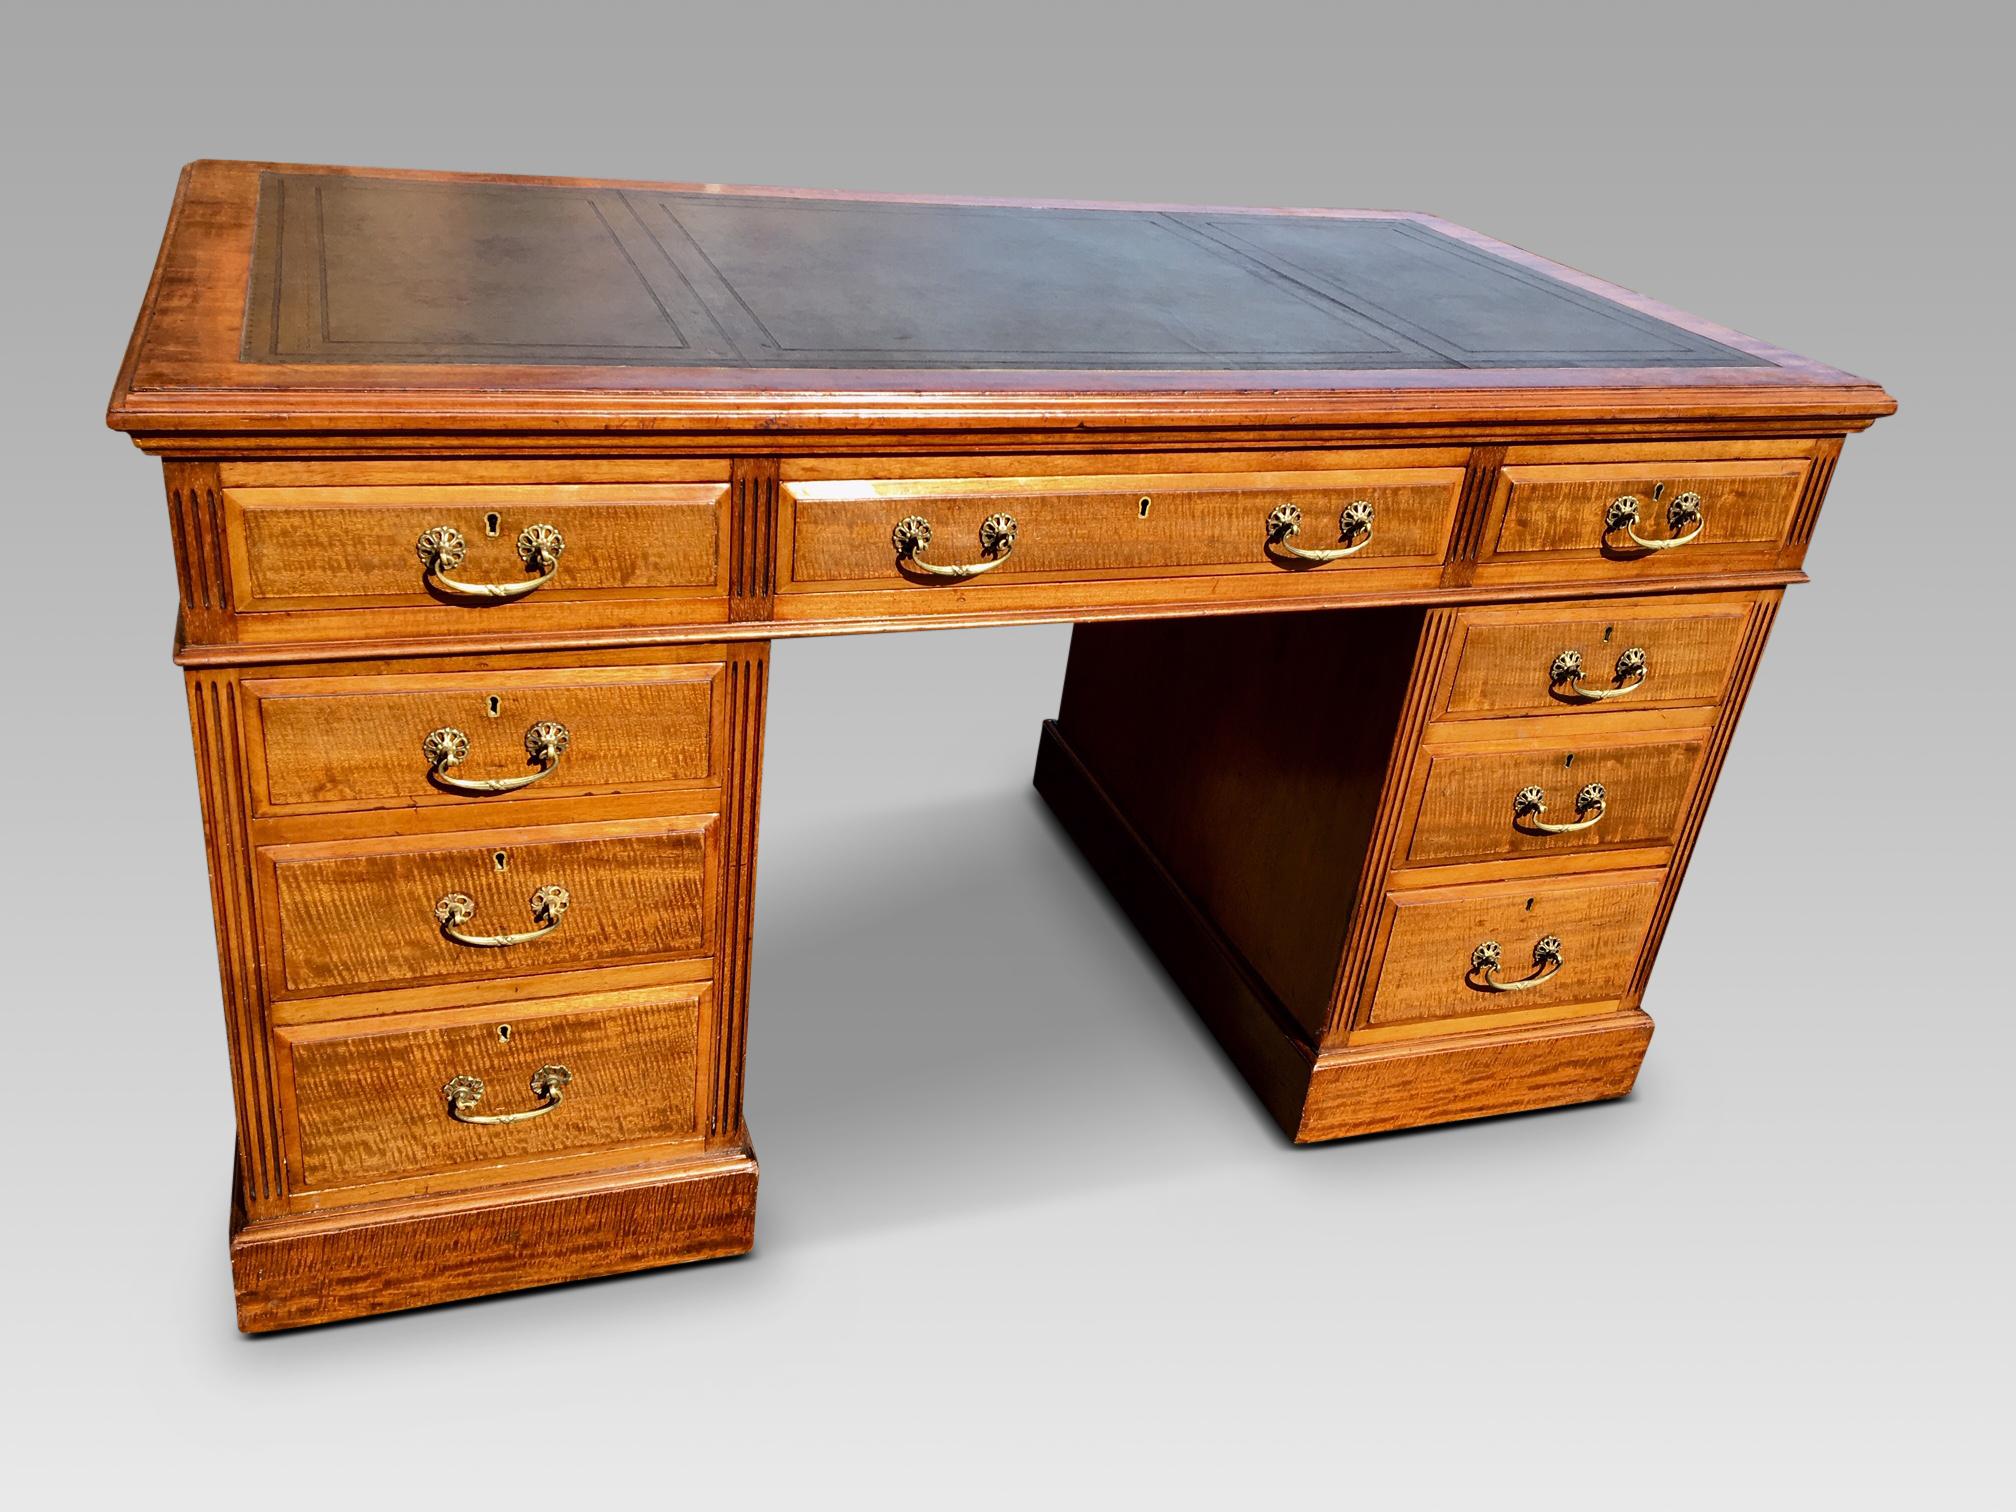 Fine quality English Mahogany writing desk in clean and bright original condition, circa 1890.
This delightful desk retains its original polish, with a good mellow colour and patina. The 9 drawers run smoothly, are solidly made with their original